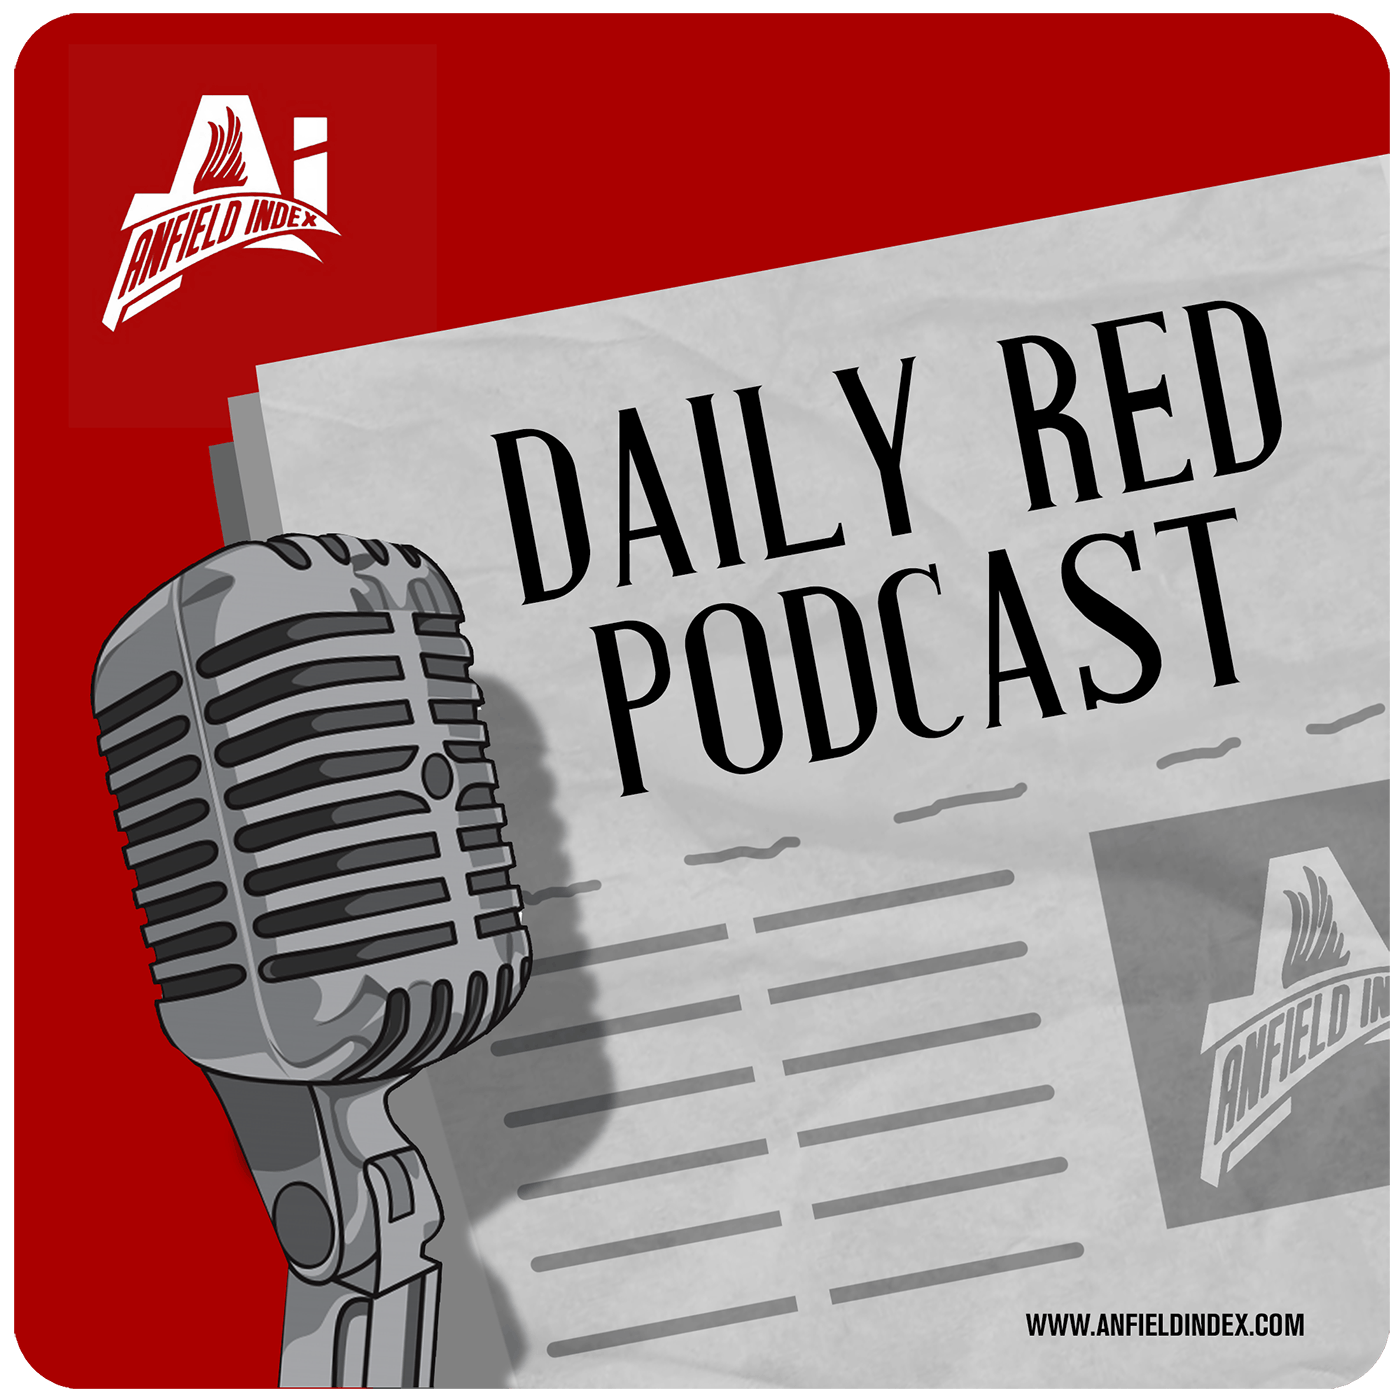 Back To Winning Ways - Daily Red Podcast